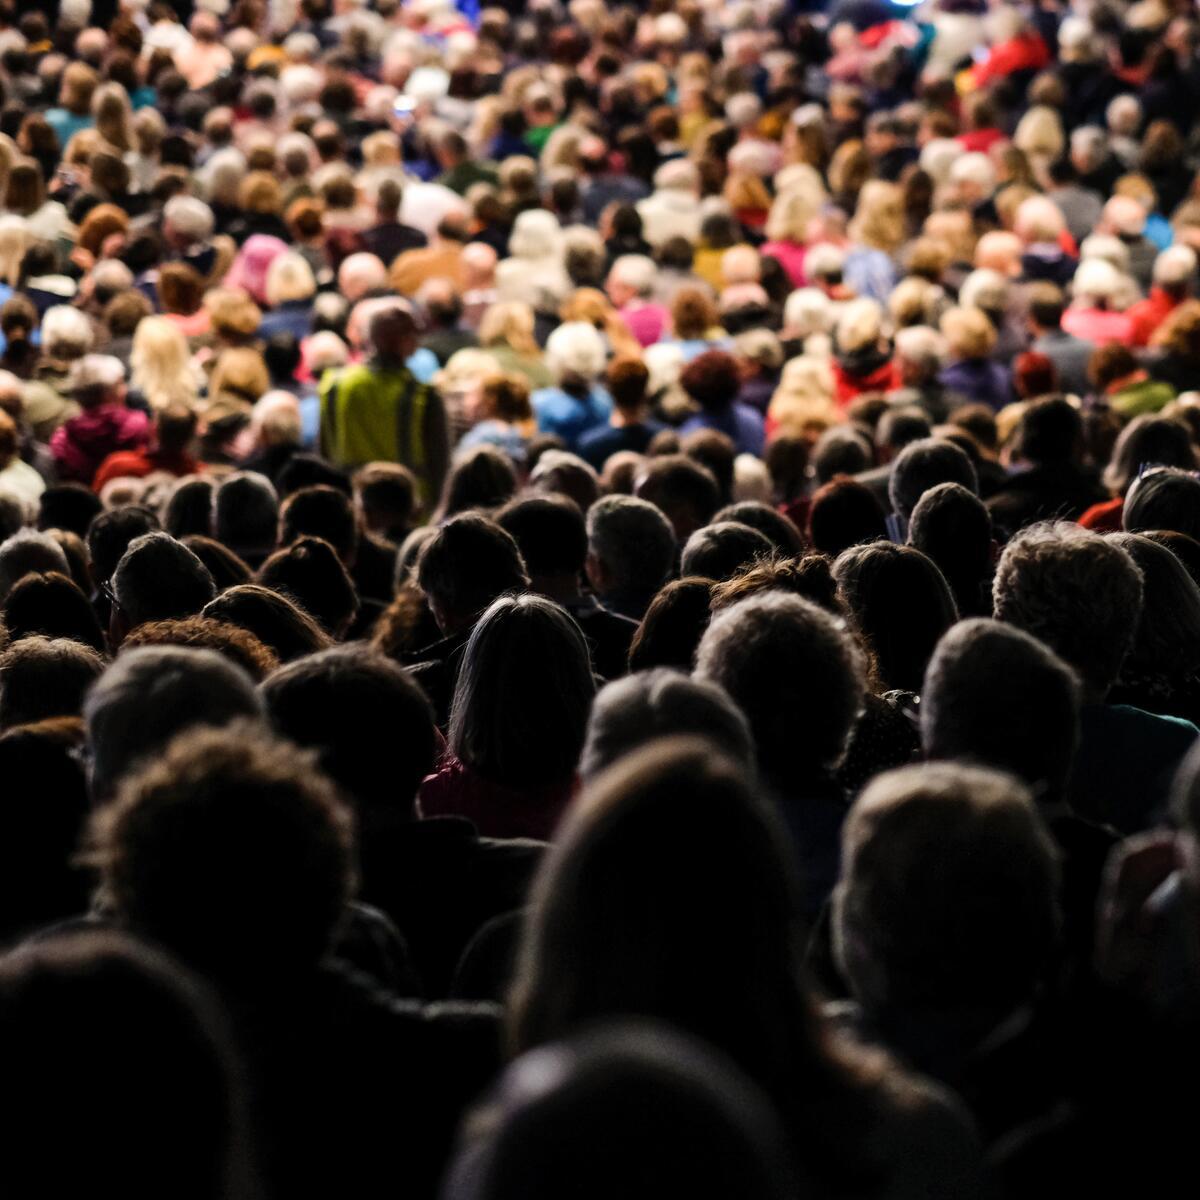 The Crowd at Hay Festival in 2019